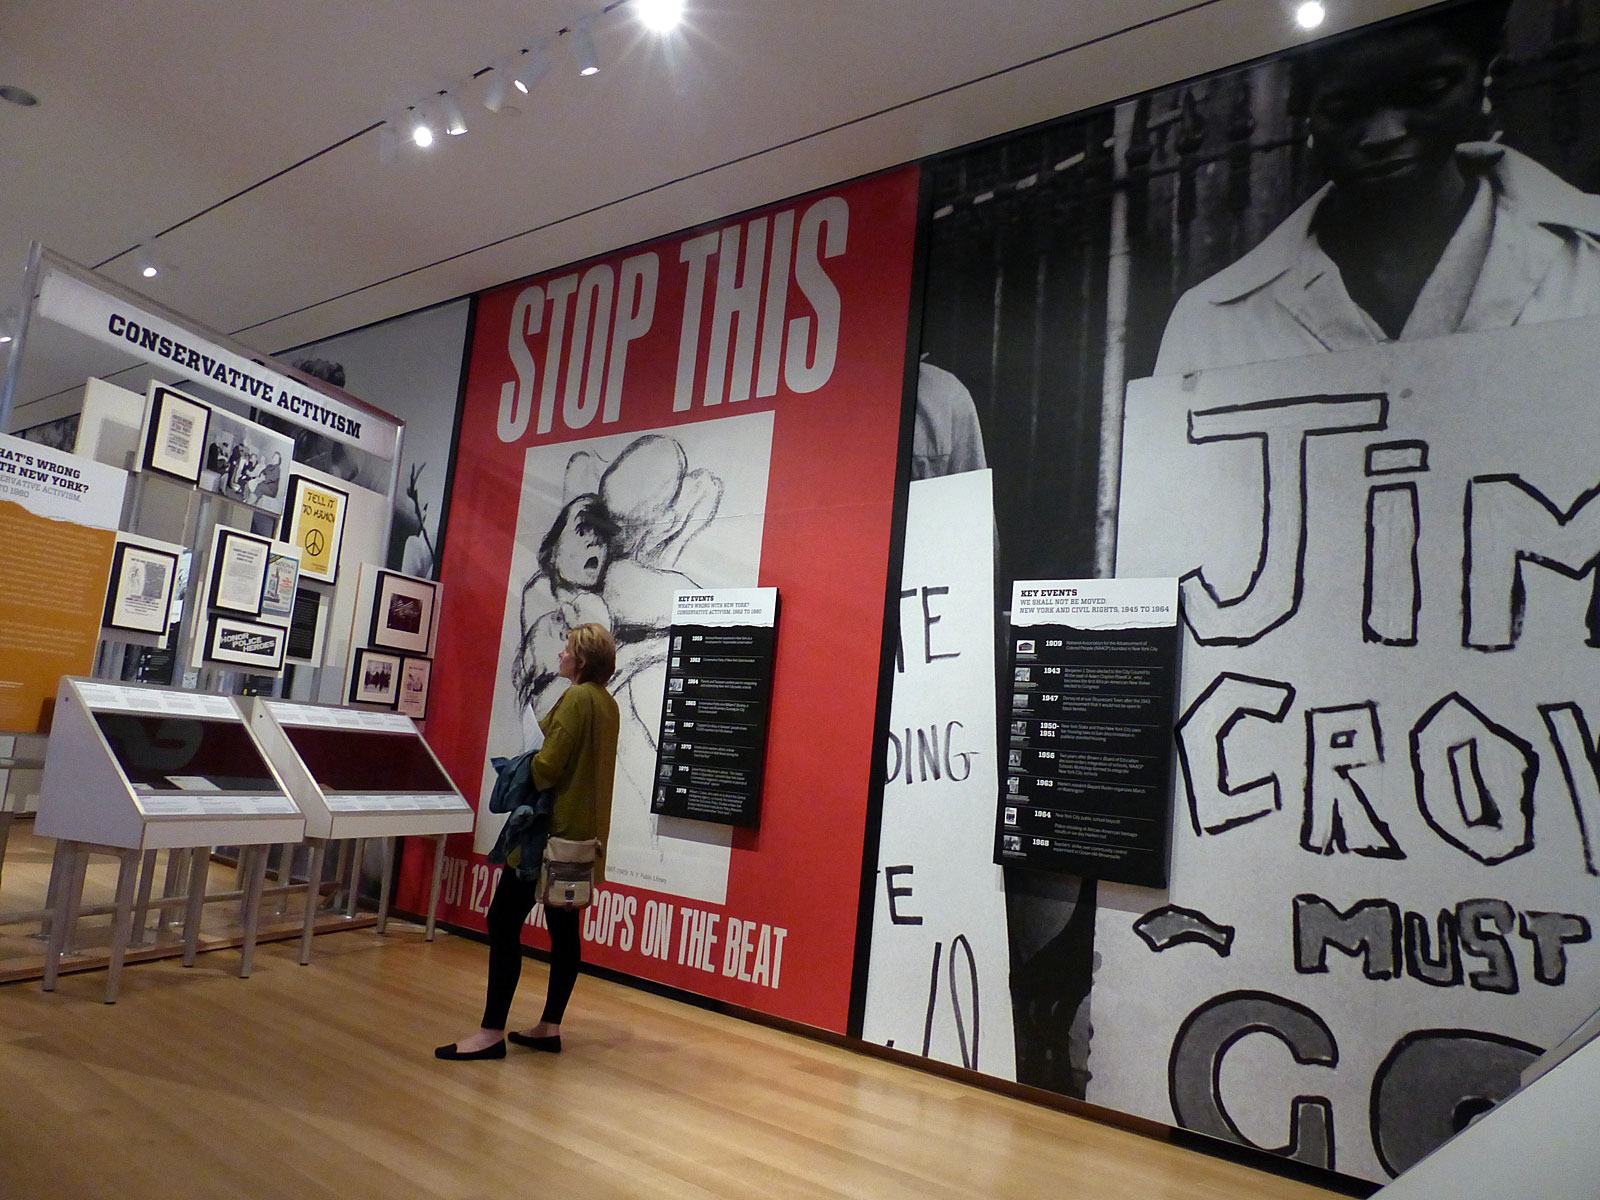 Photograph is from the Activist New York exhibition. Sections depicted in the photograph are from the gallery, under Civil Rights and Conservative Activism in New York City sections. 